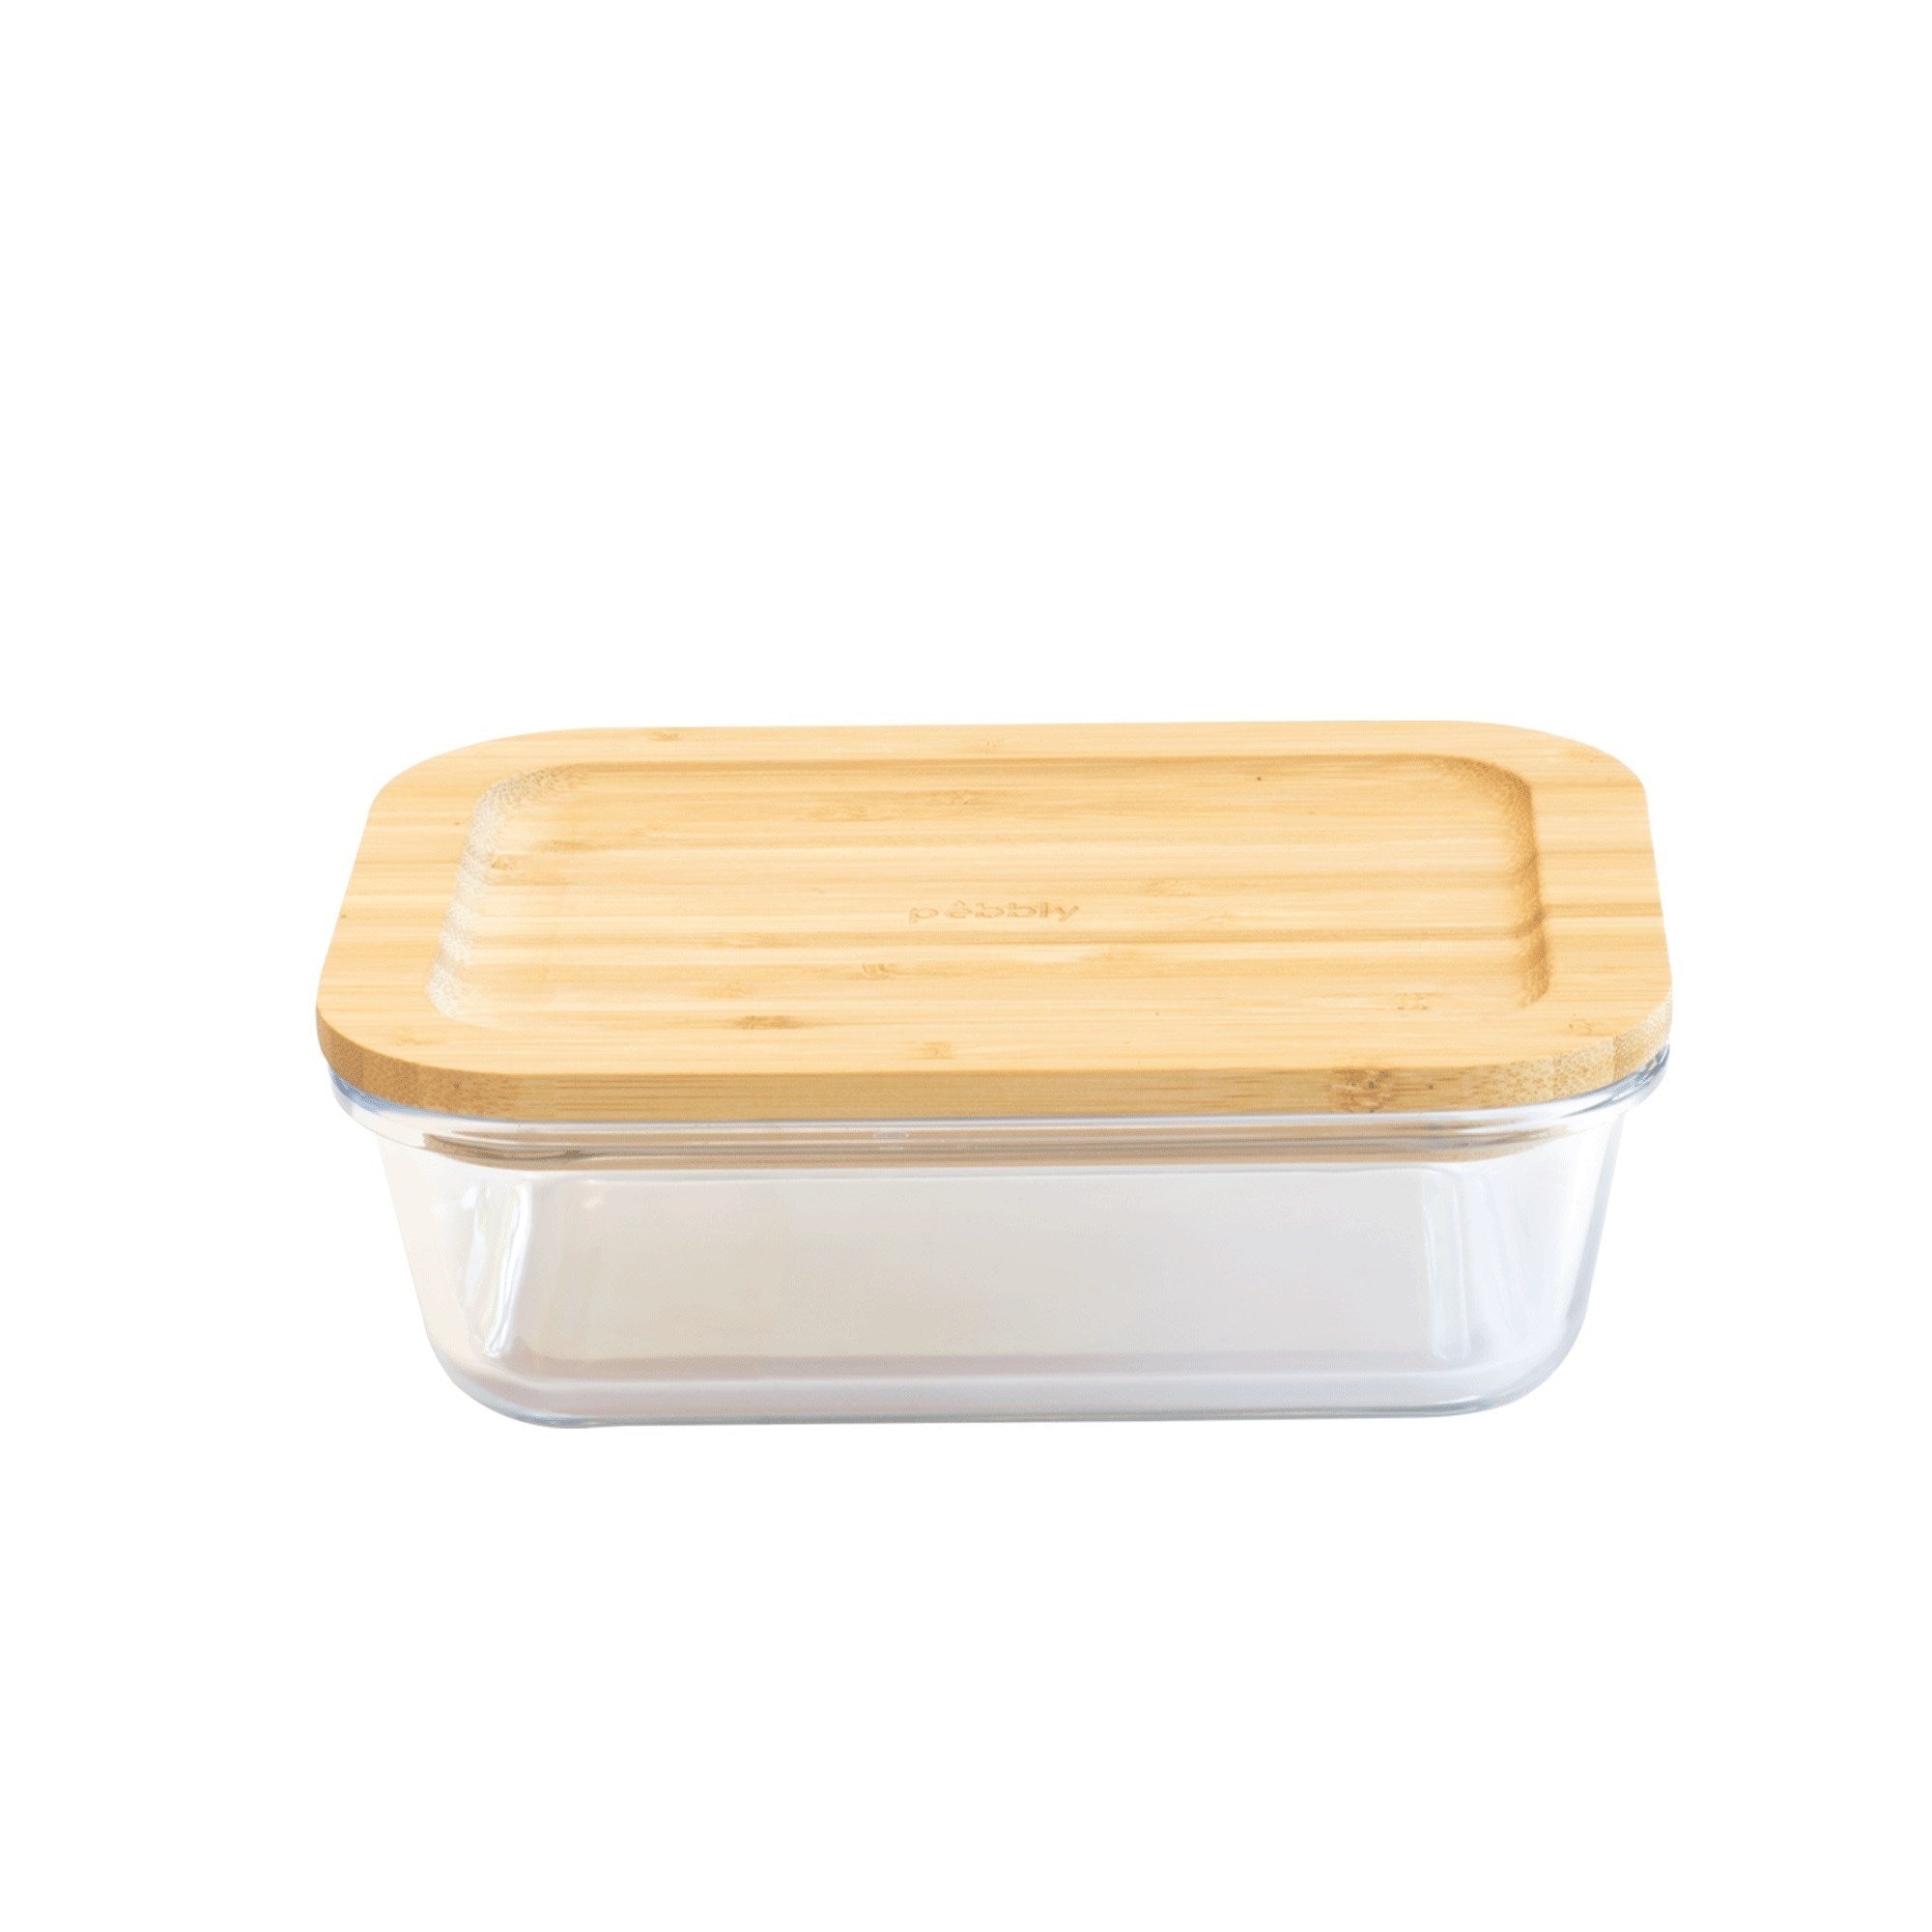 Pebbly RECTANGULAR Container 1500ml/50.5oz Glass w/Bamboo Lid 22x16.5x7.5cm